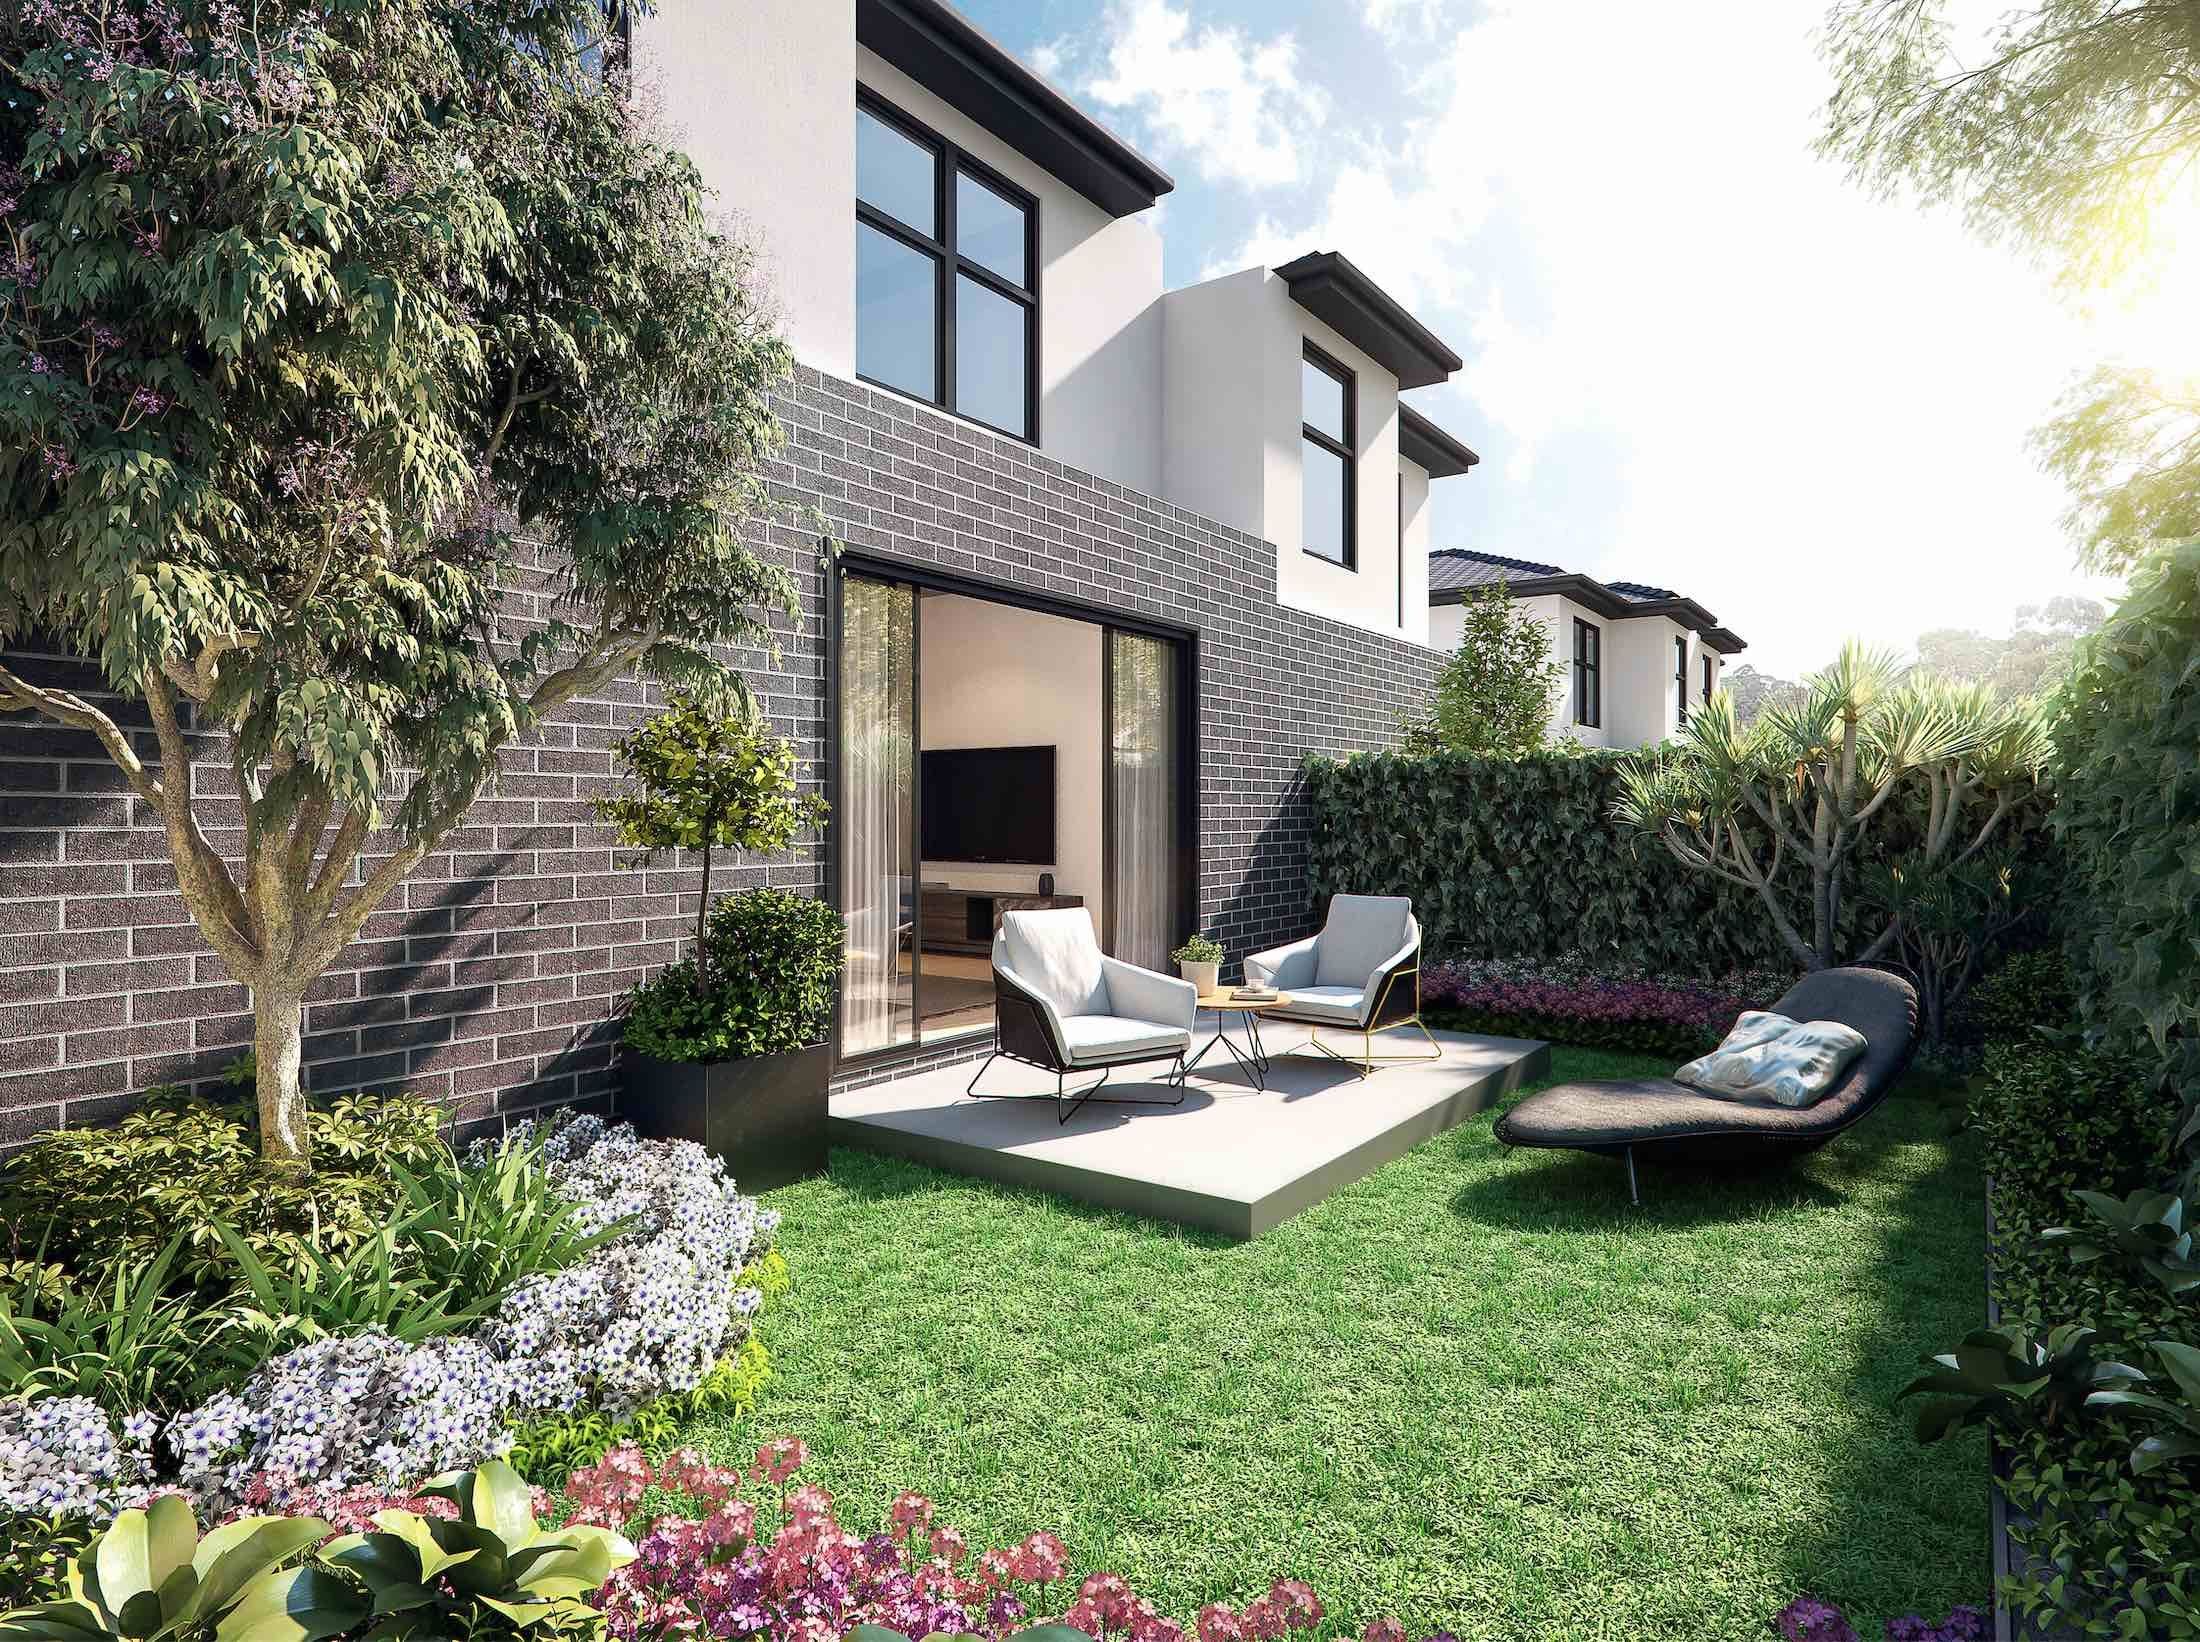 Lilydale - Lilydale Gardens - 25 Albert Hill Road, Lilydale, VIC 3140 - Townly - 7.jpg